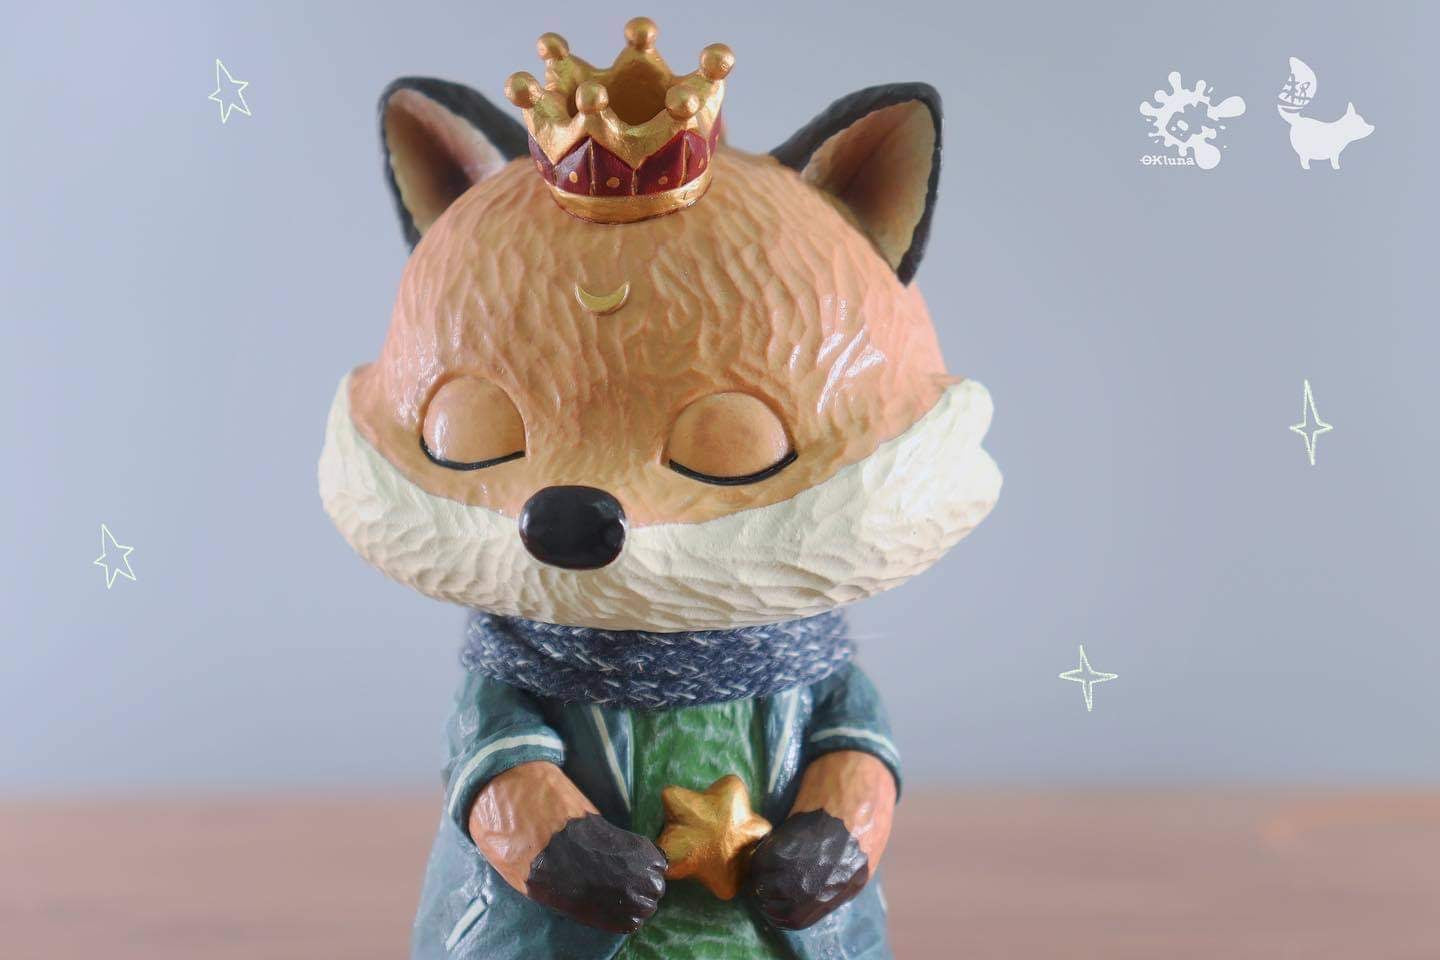 Okluna x Woodcarving animals: The king of another world